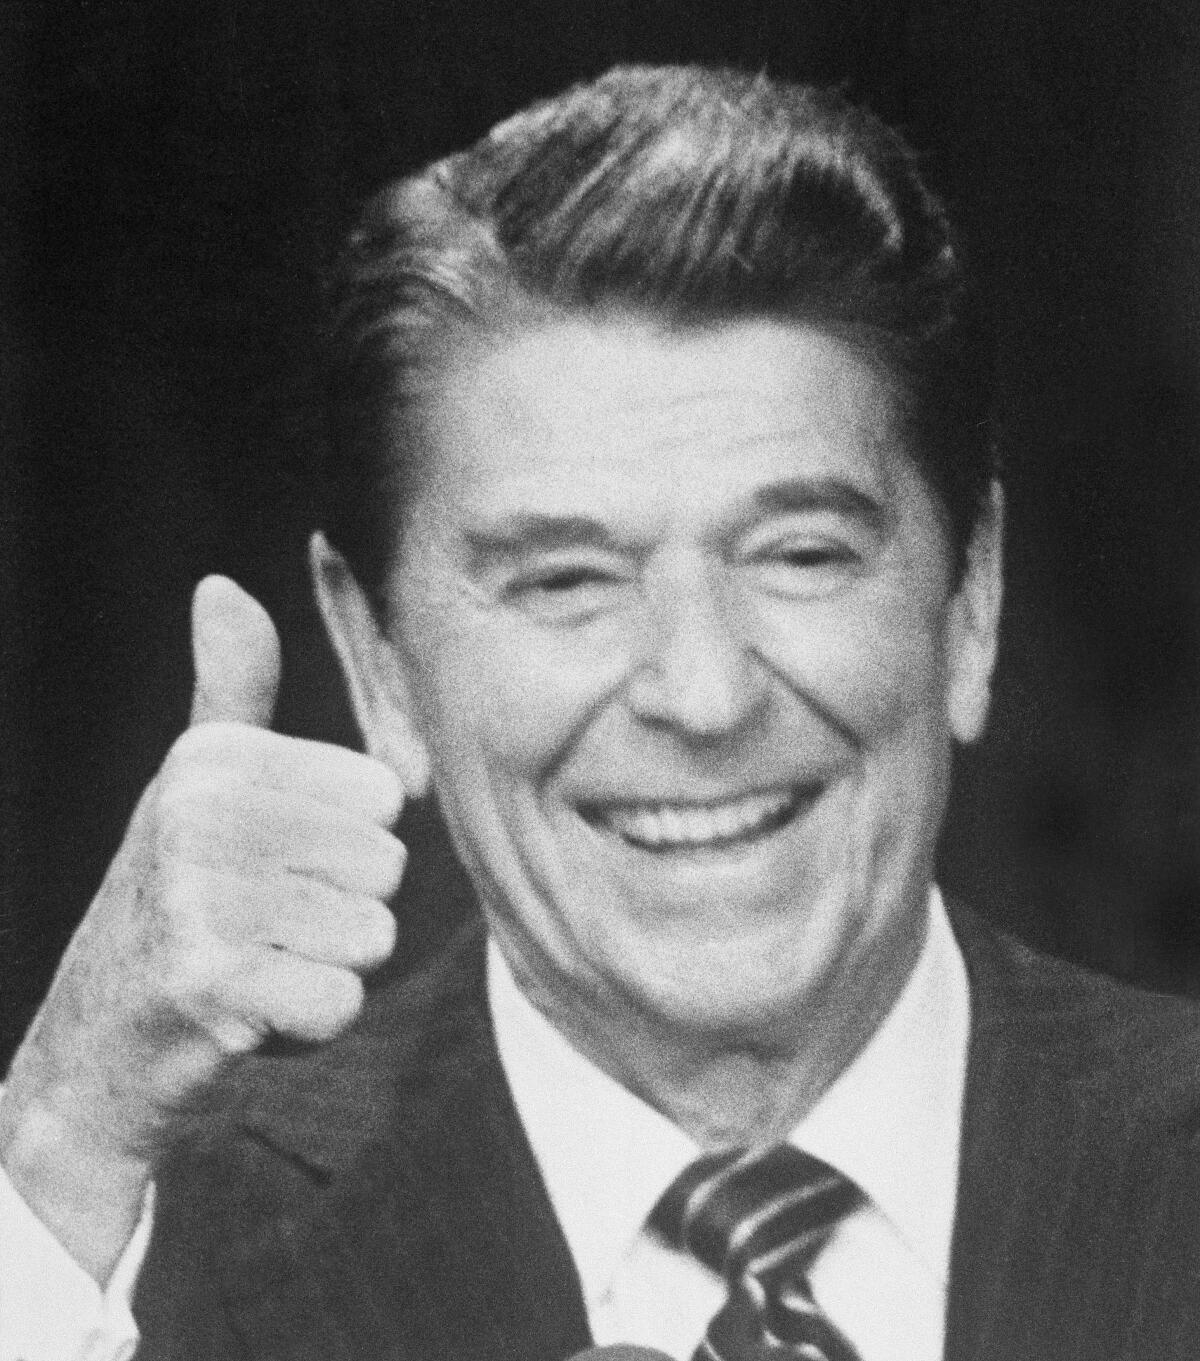 President Reagan smiles and gives a thumbs up